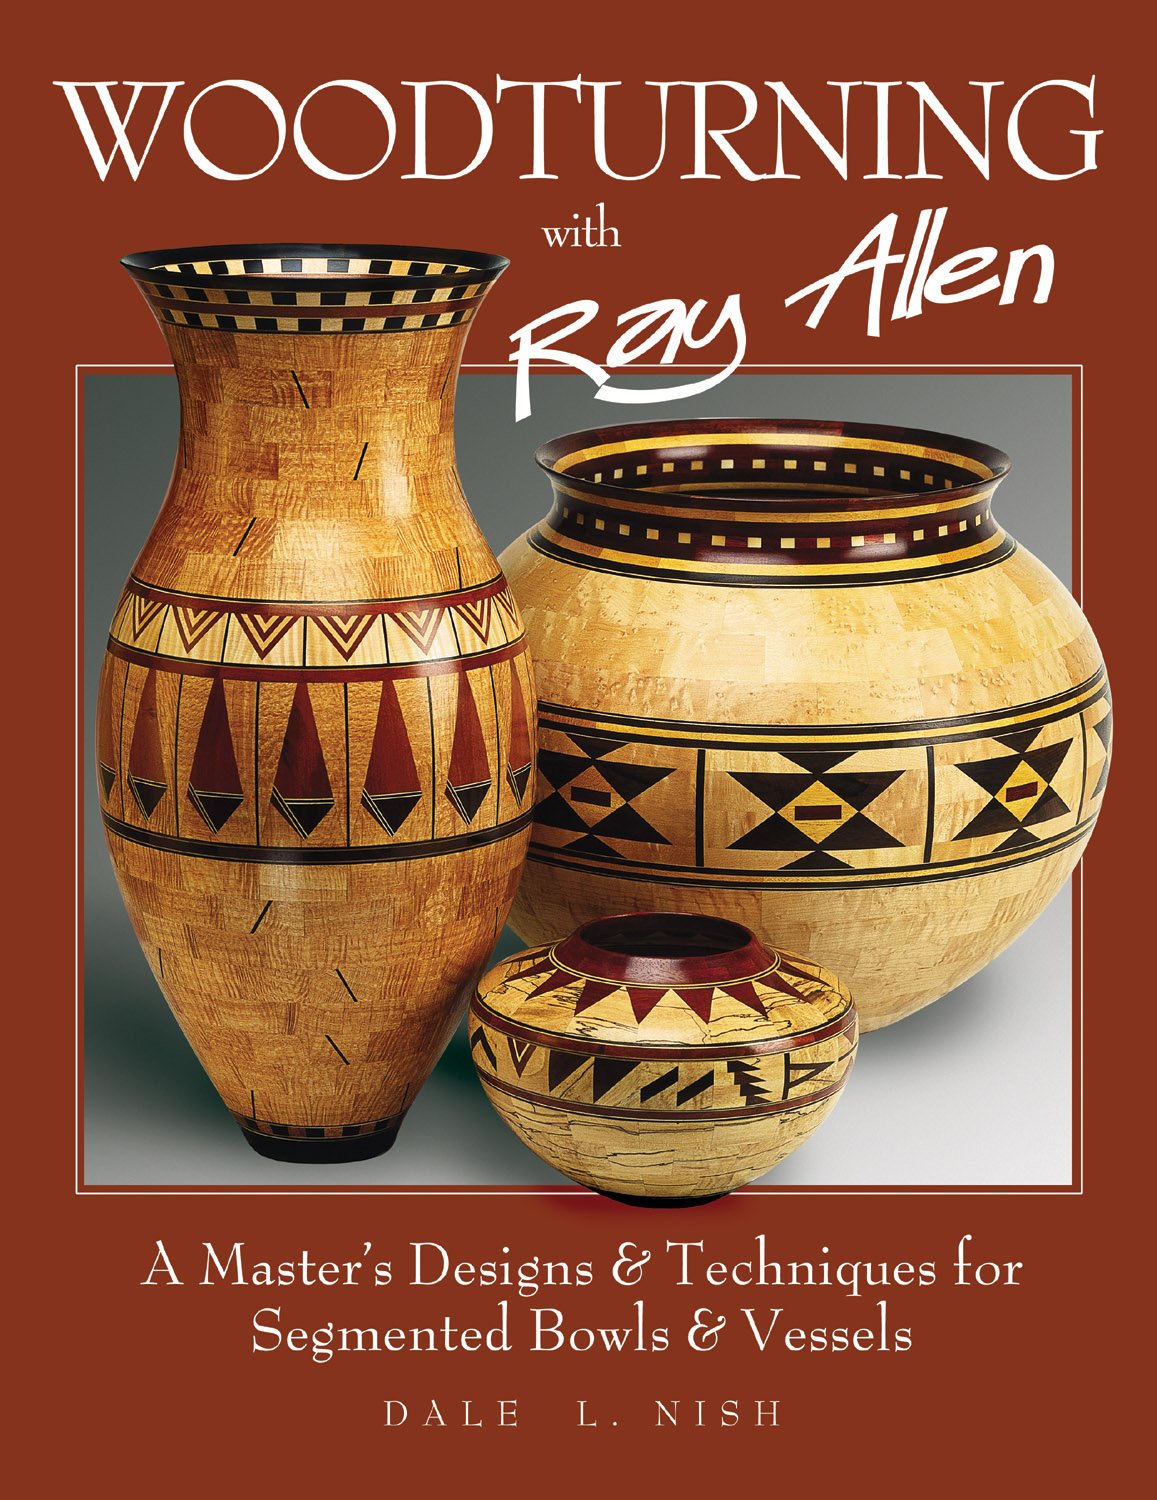 Woodturning with Ray Allen: A Master's Designs & Techniques for Segmented Bowls and Vessels (Fox Chapel Publishing) 11 Plans and a Gallery of Work